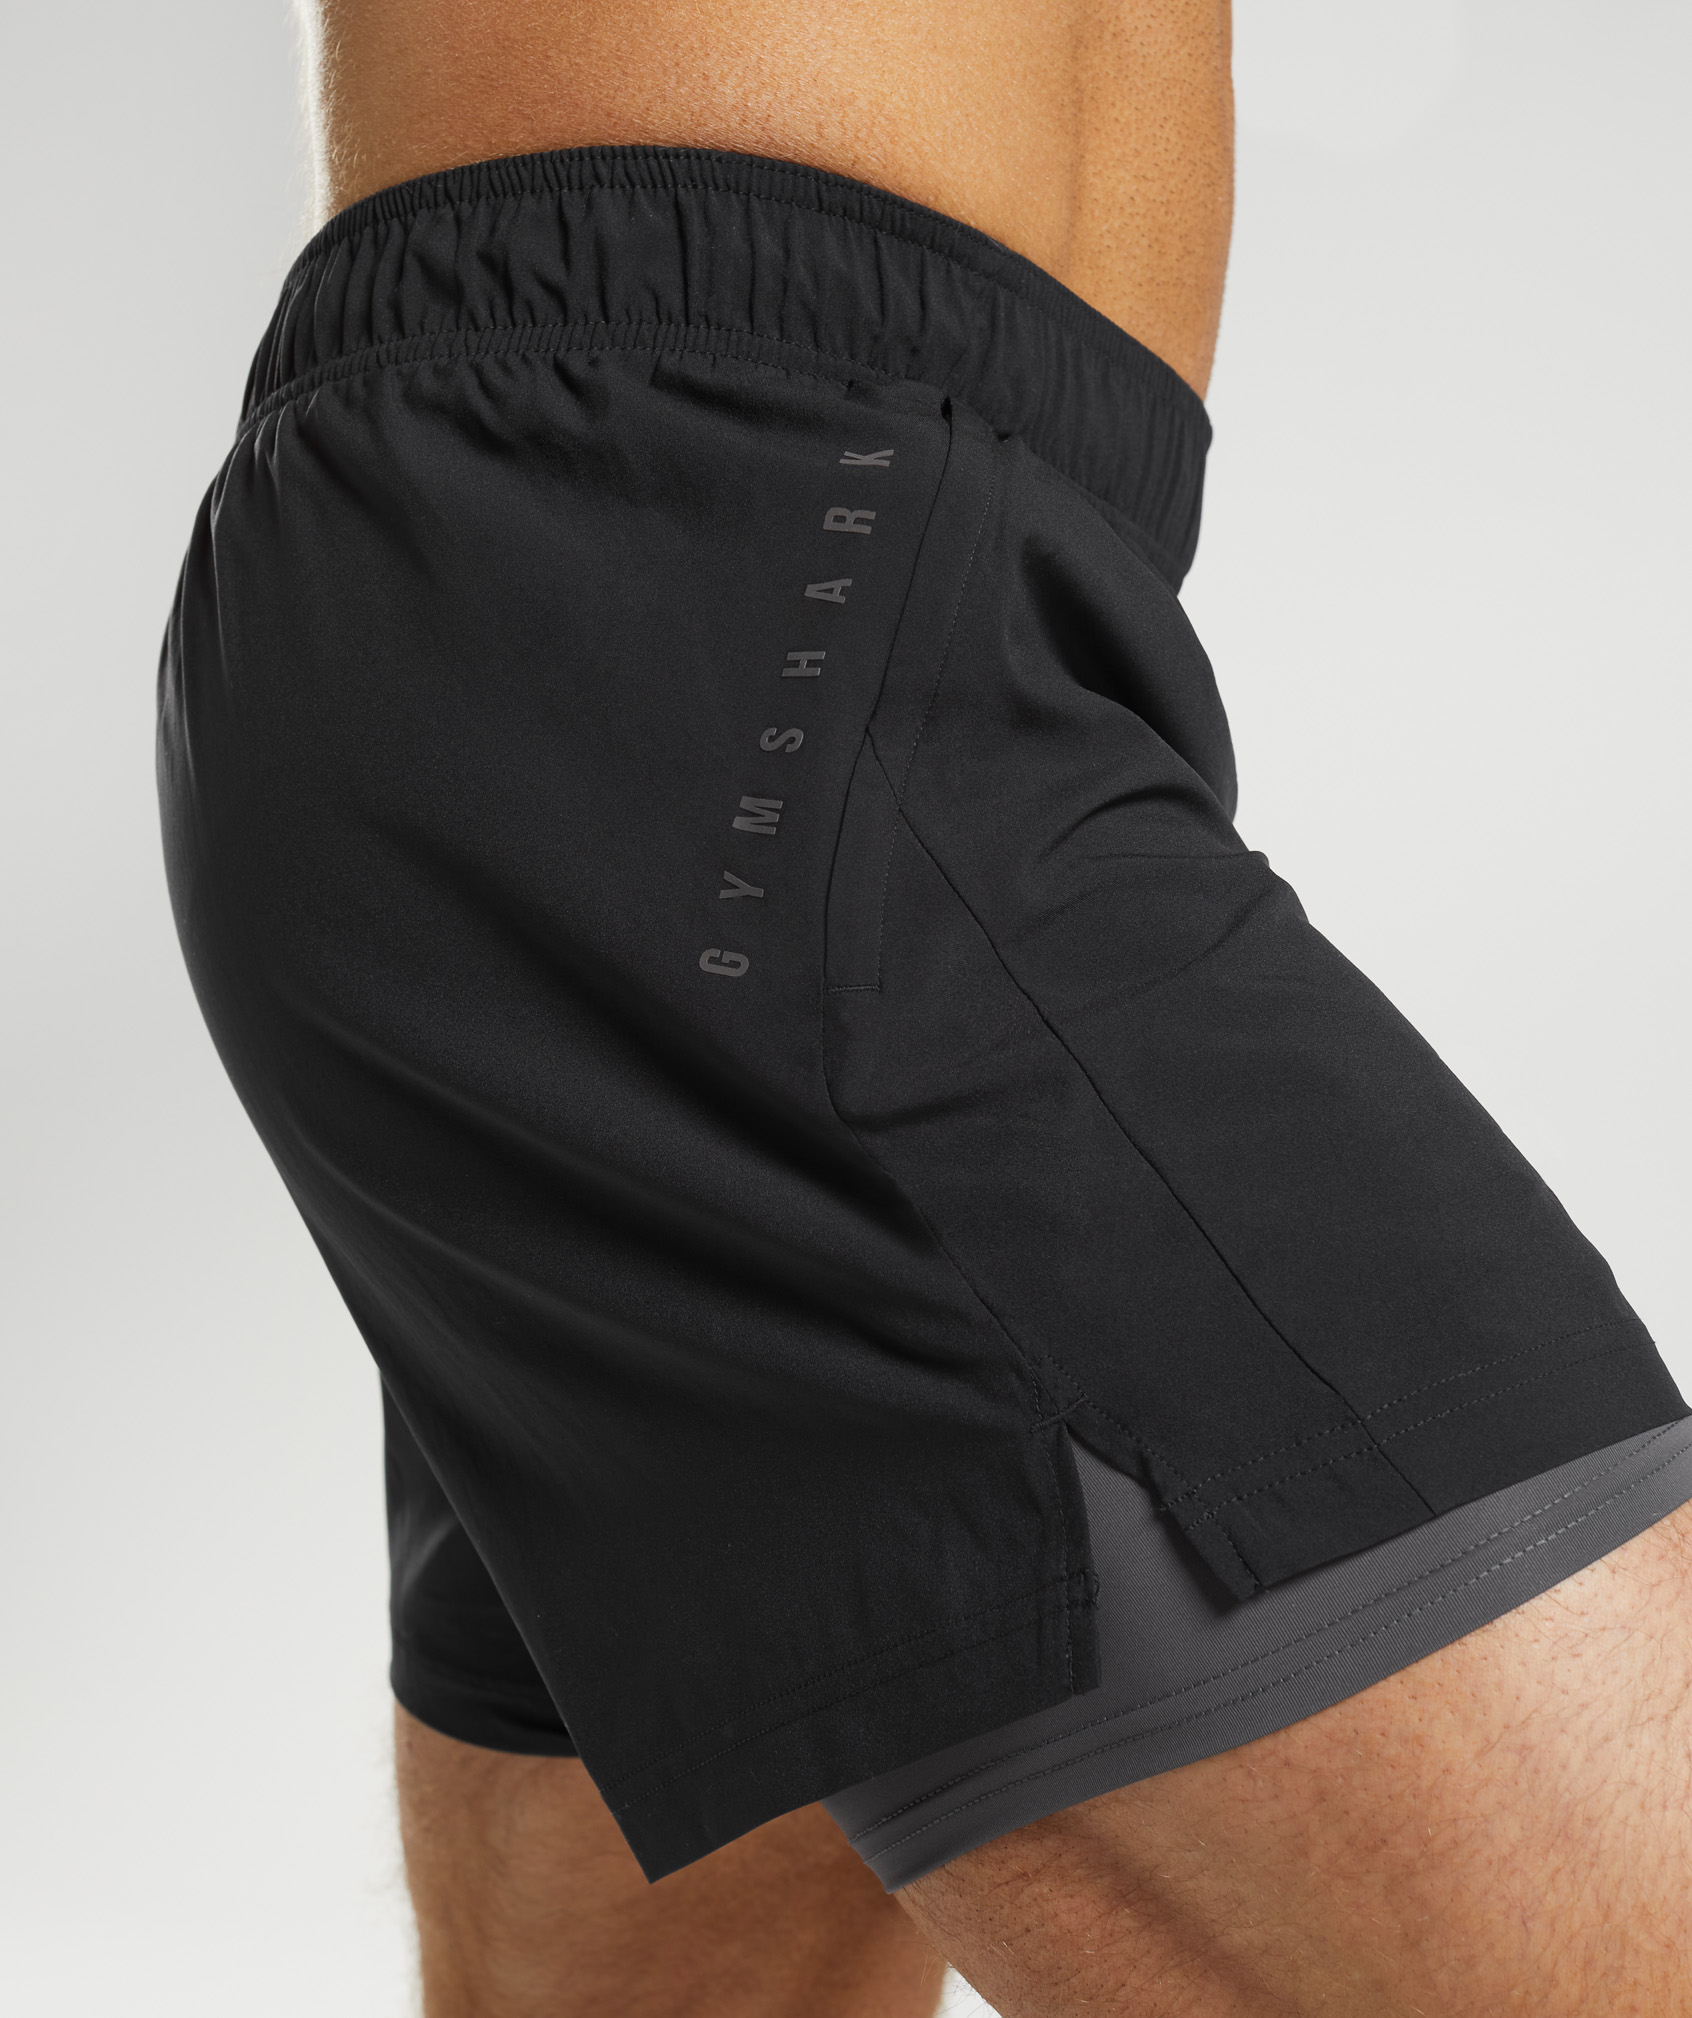 What Are Hoochie Daddy Shorts? Explore The Best Men's Short Shorts For 2023